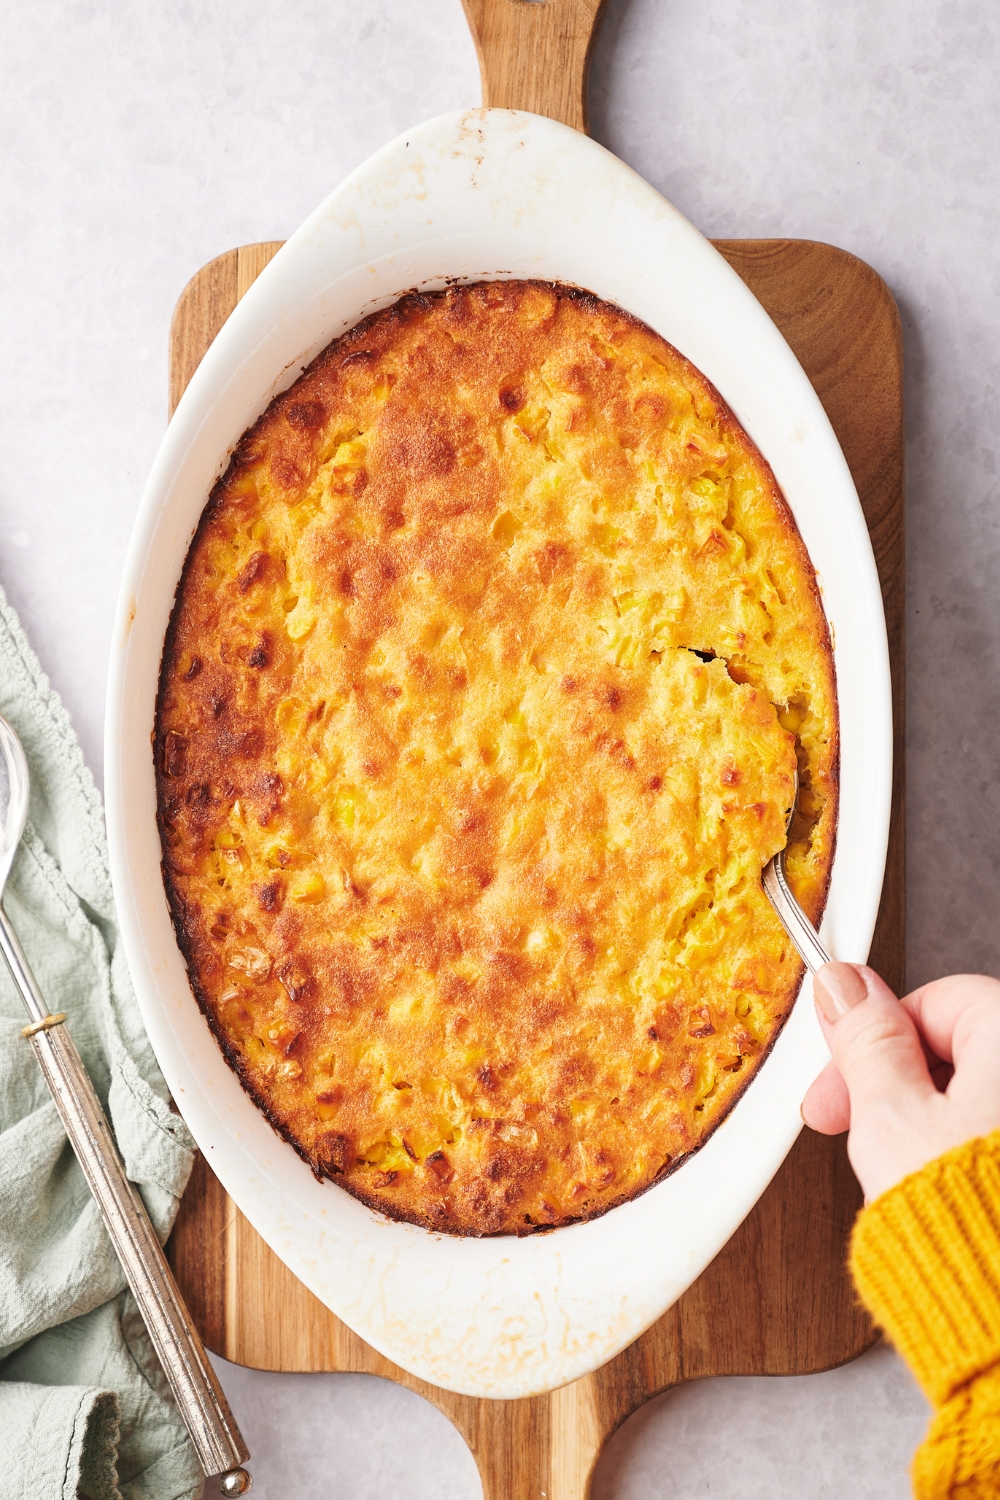 A casserole dish with cooked corn souffle. A hand is scooping a bit of it with a spoon.